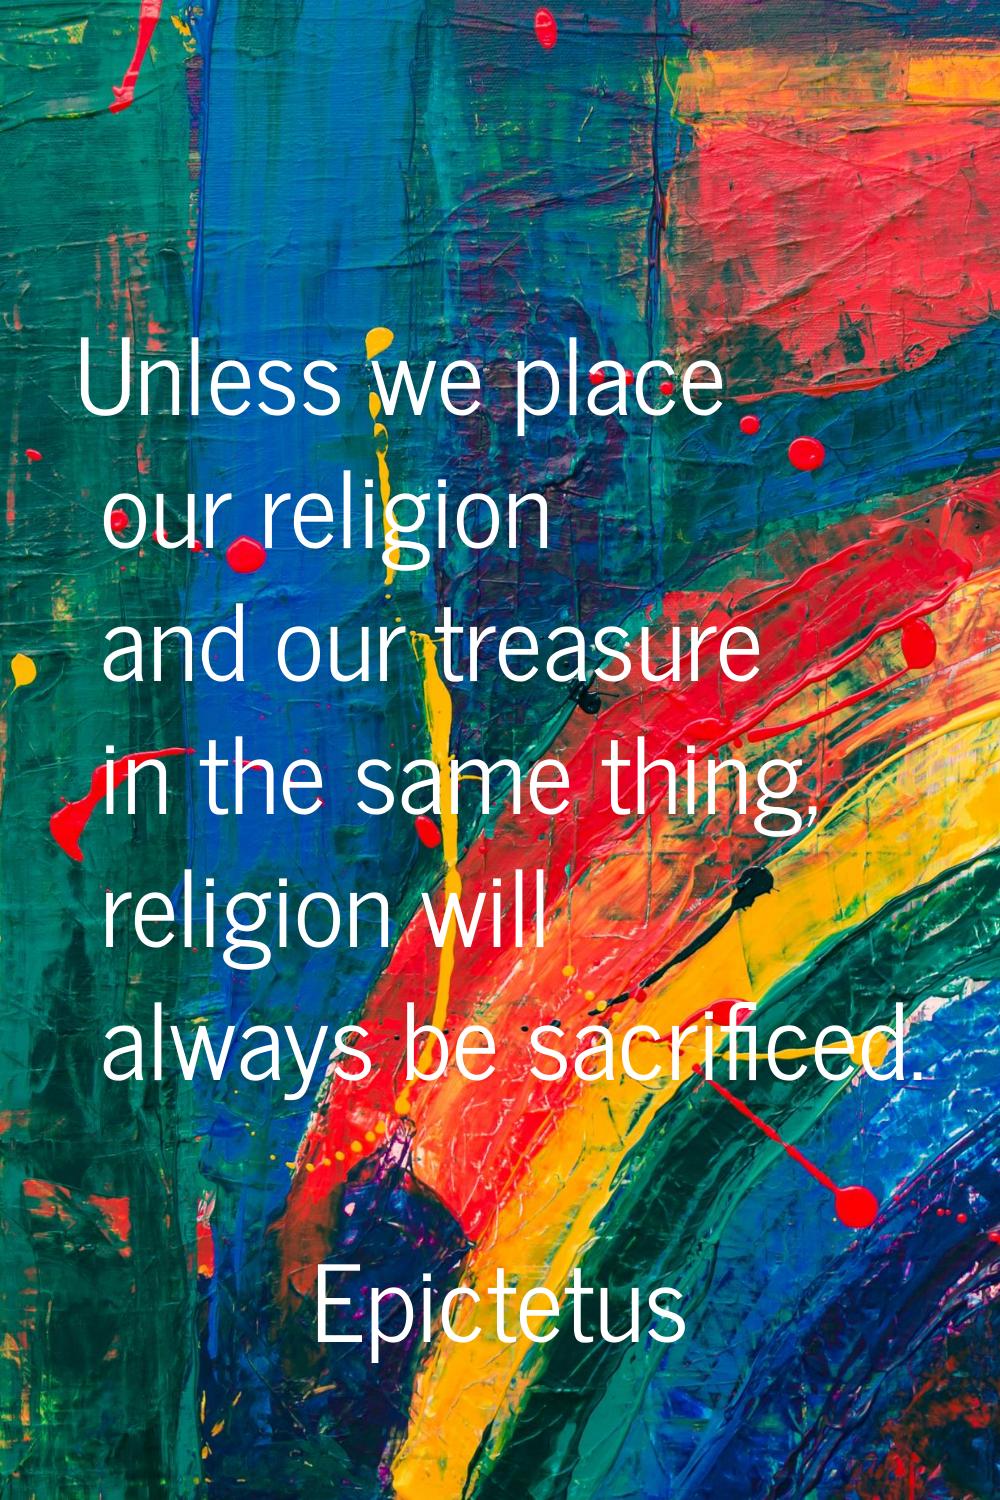 Unless we place our religion and our treasure in the same thing, religion will always be sacrificed